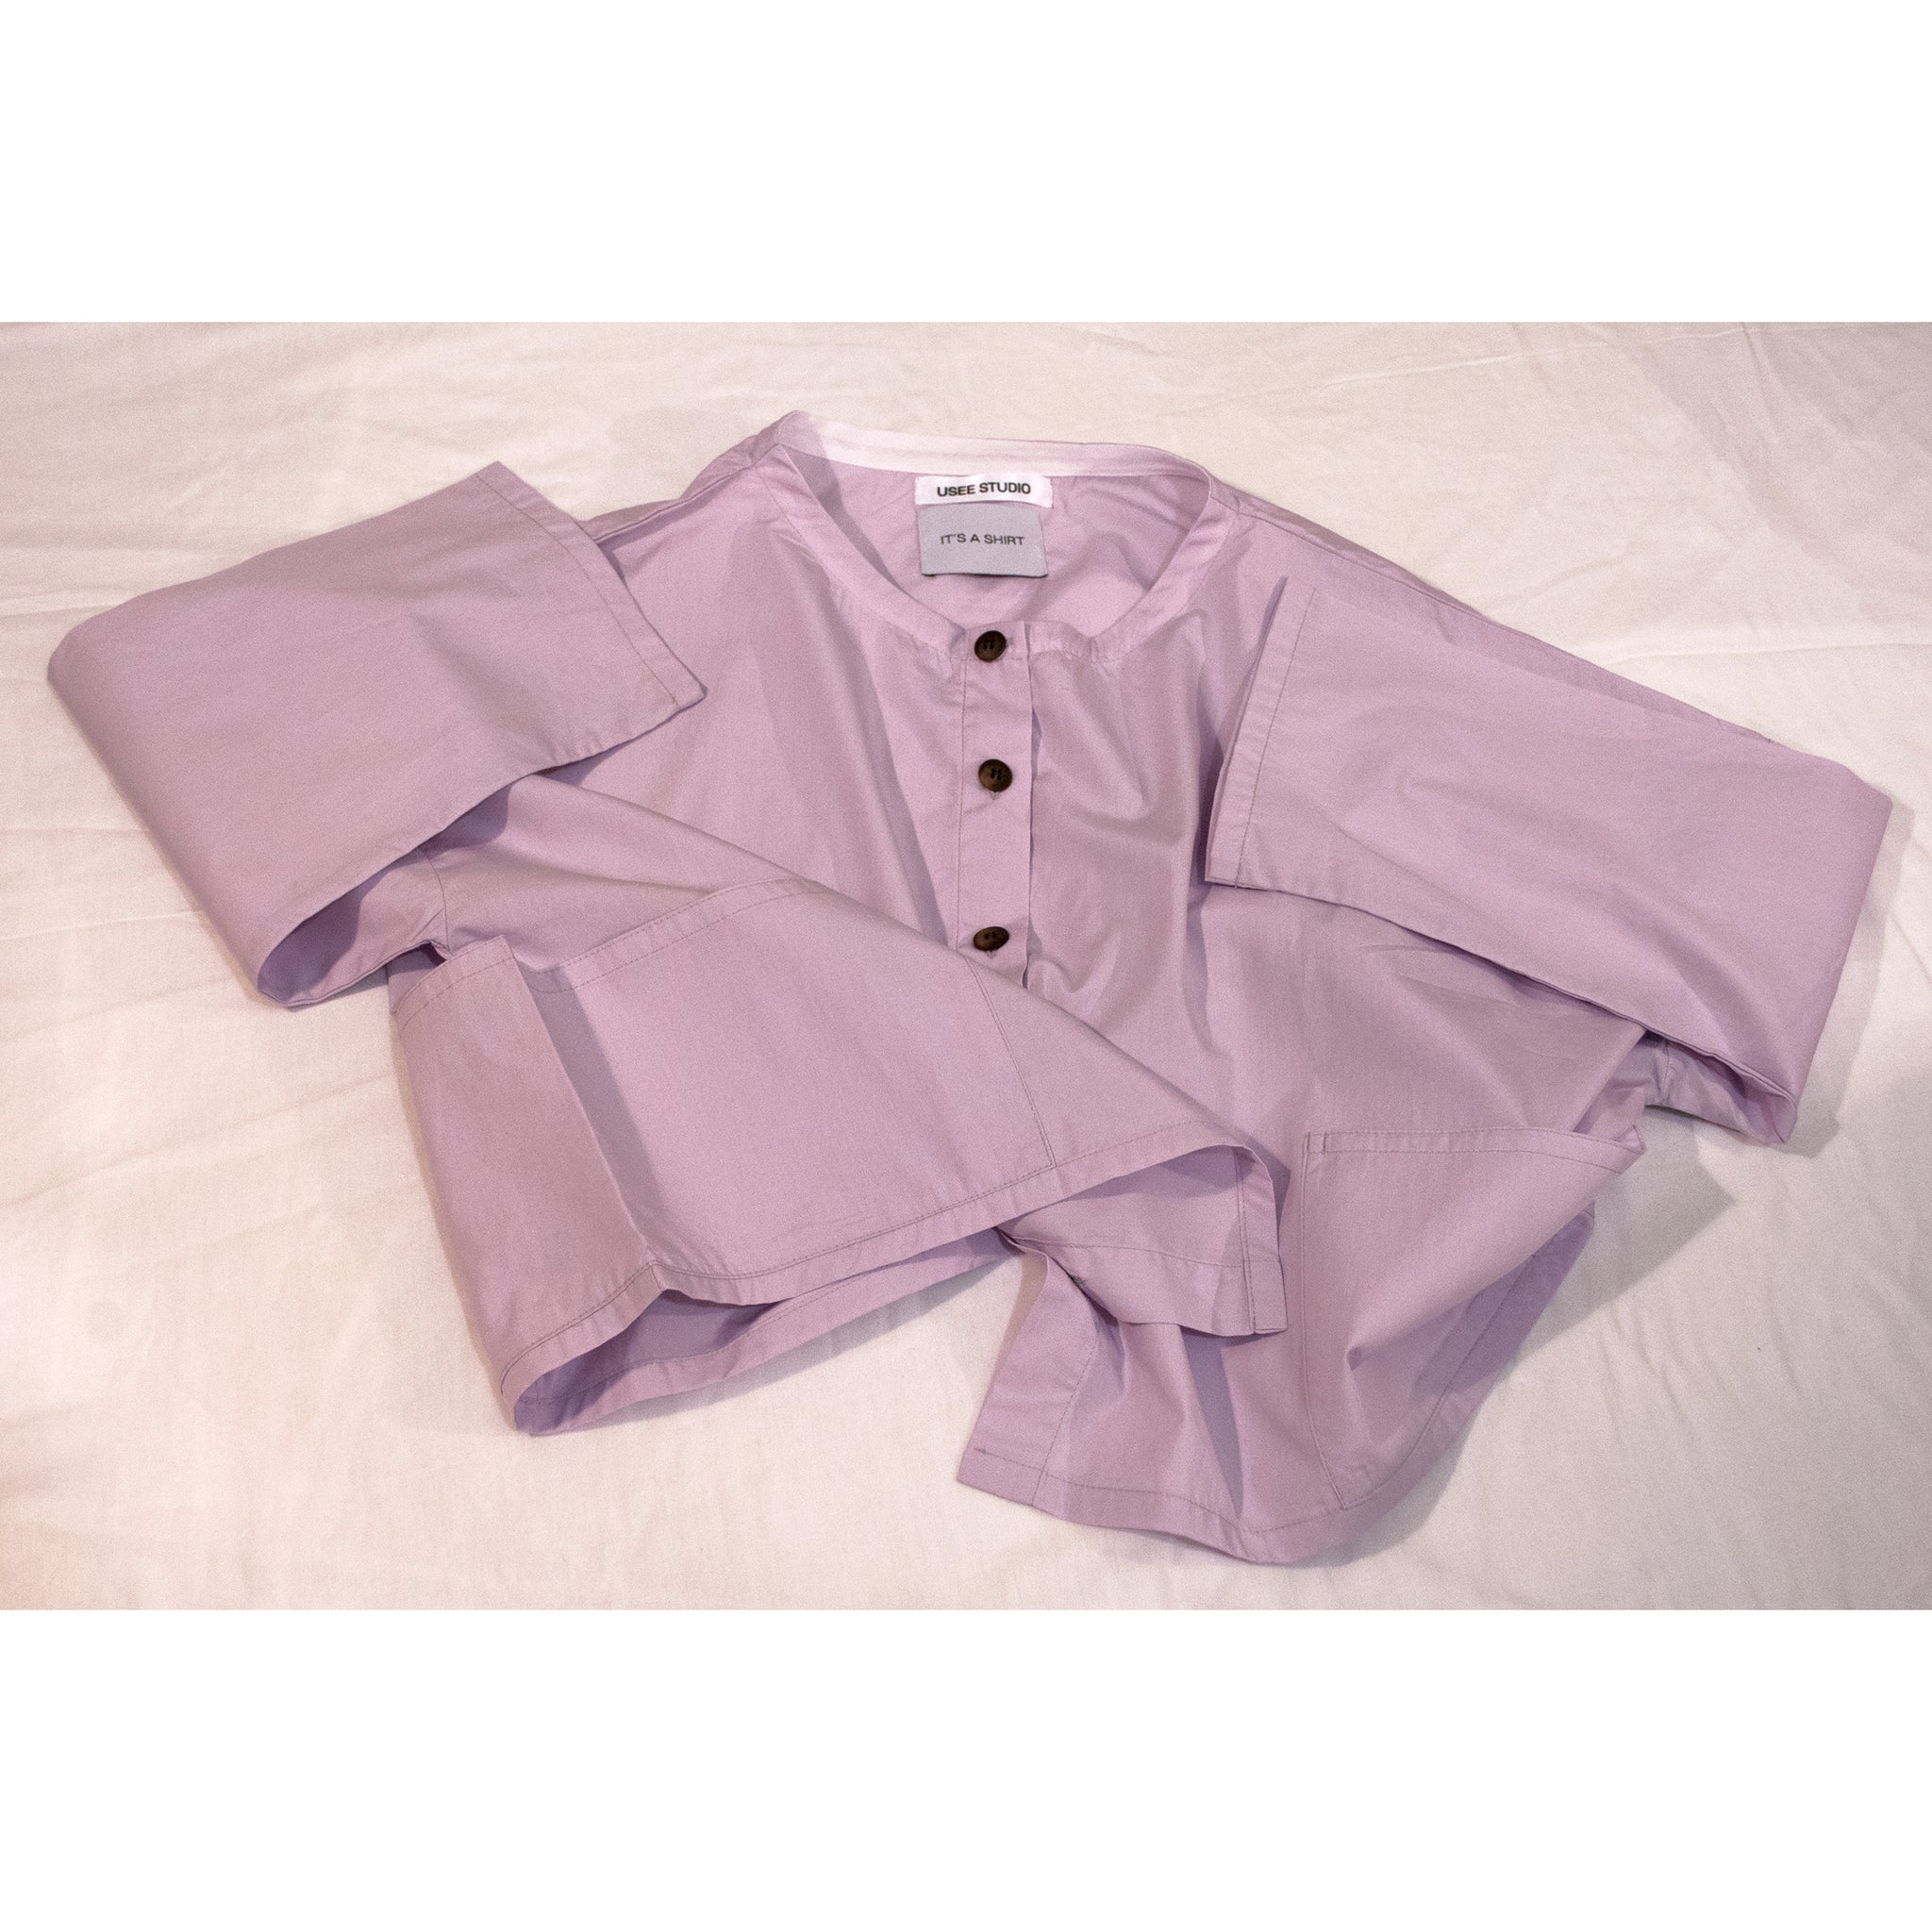 IT'S A SHIRT X USEE: LILAC